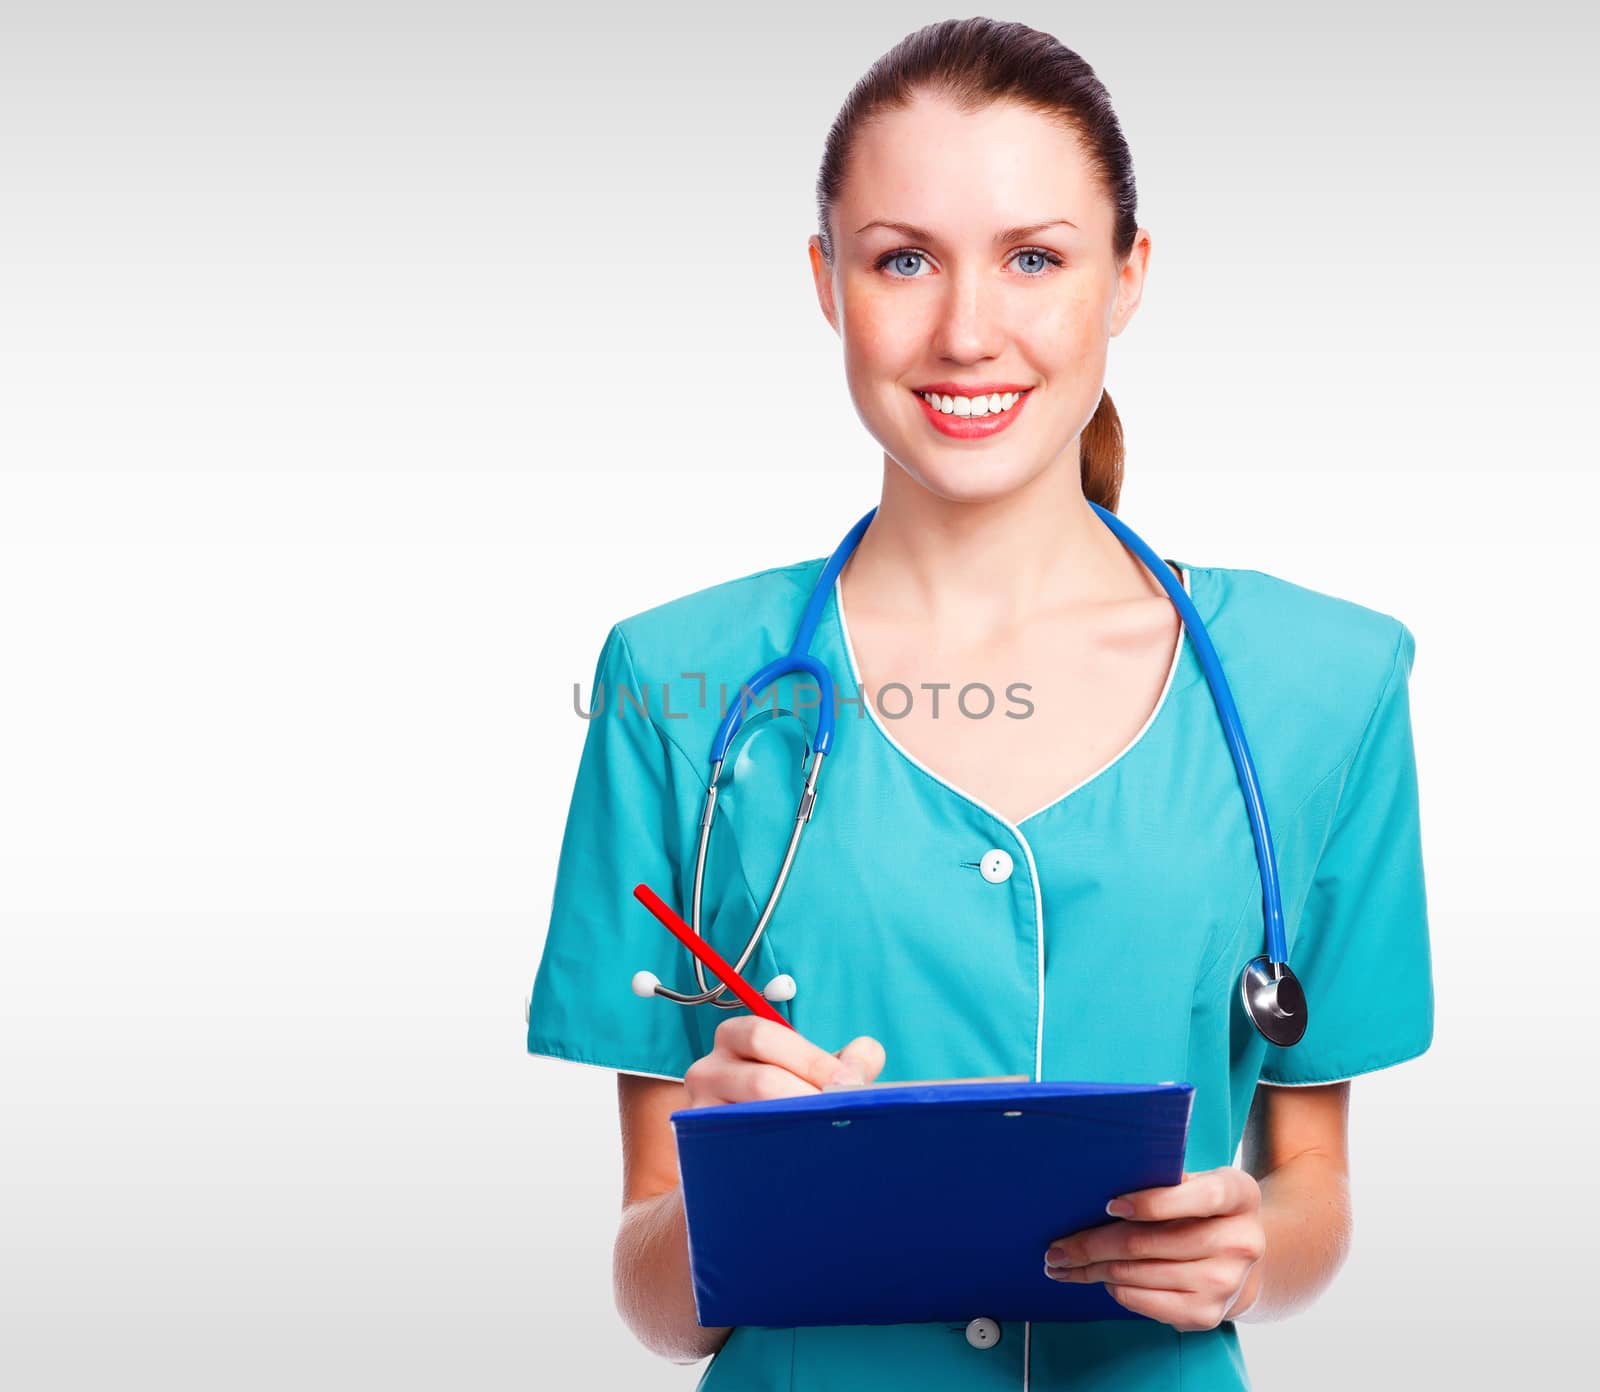 Pretty doctor woman against a grey background with copyspace